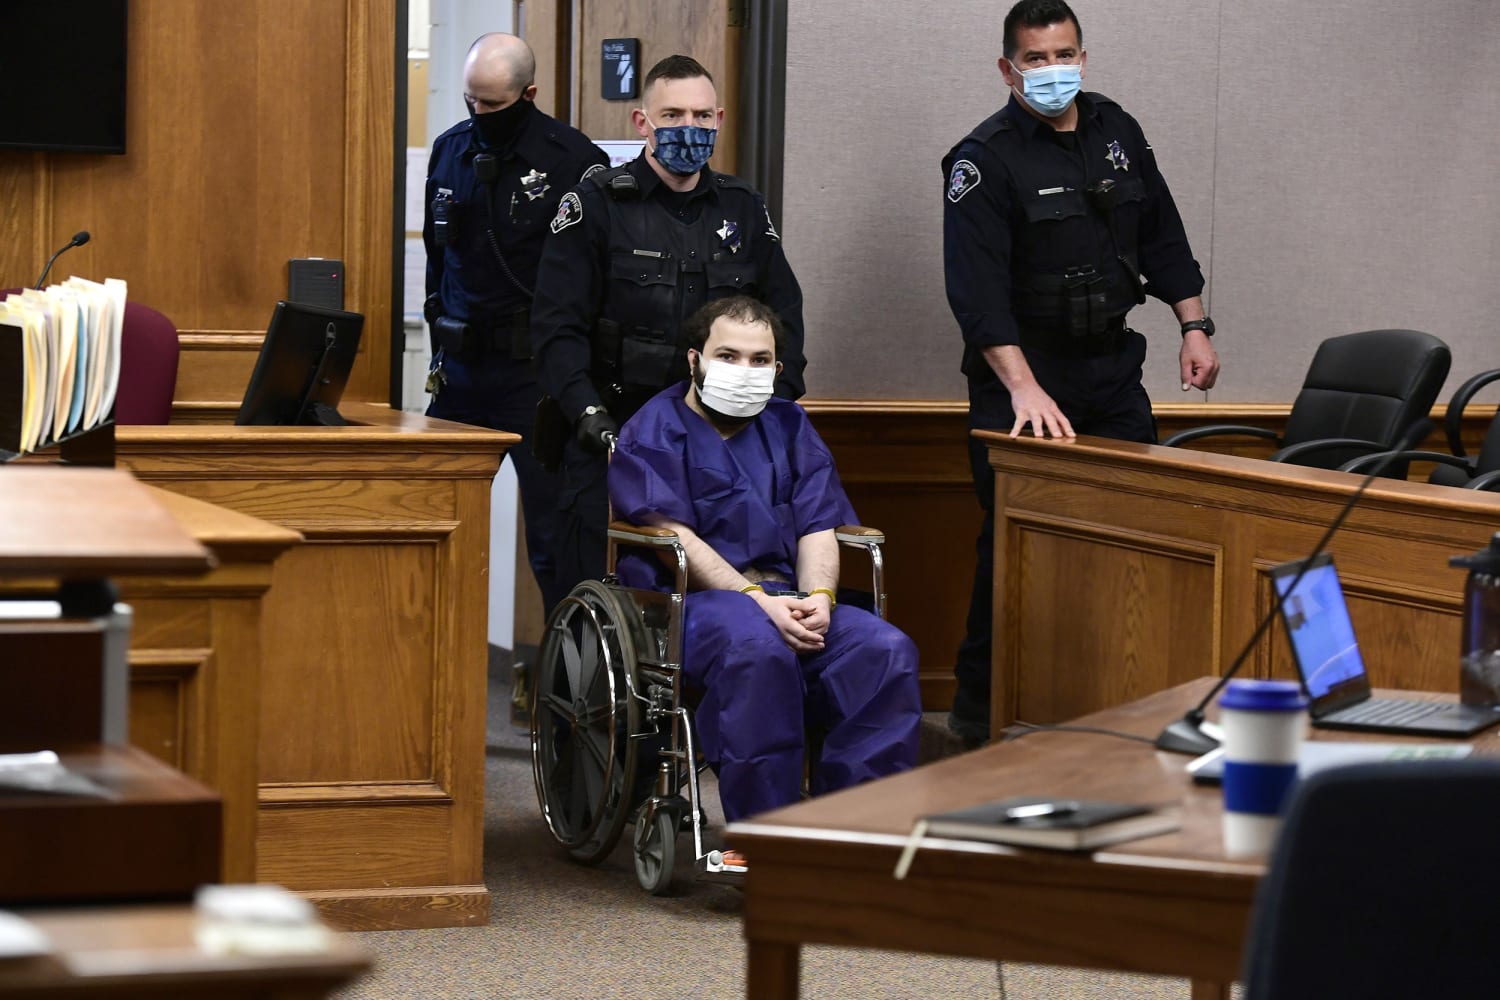 Man accused of killing 10 people at Colorado supermarket found incompetent to stand trial